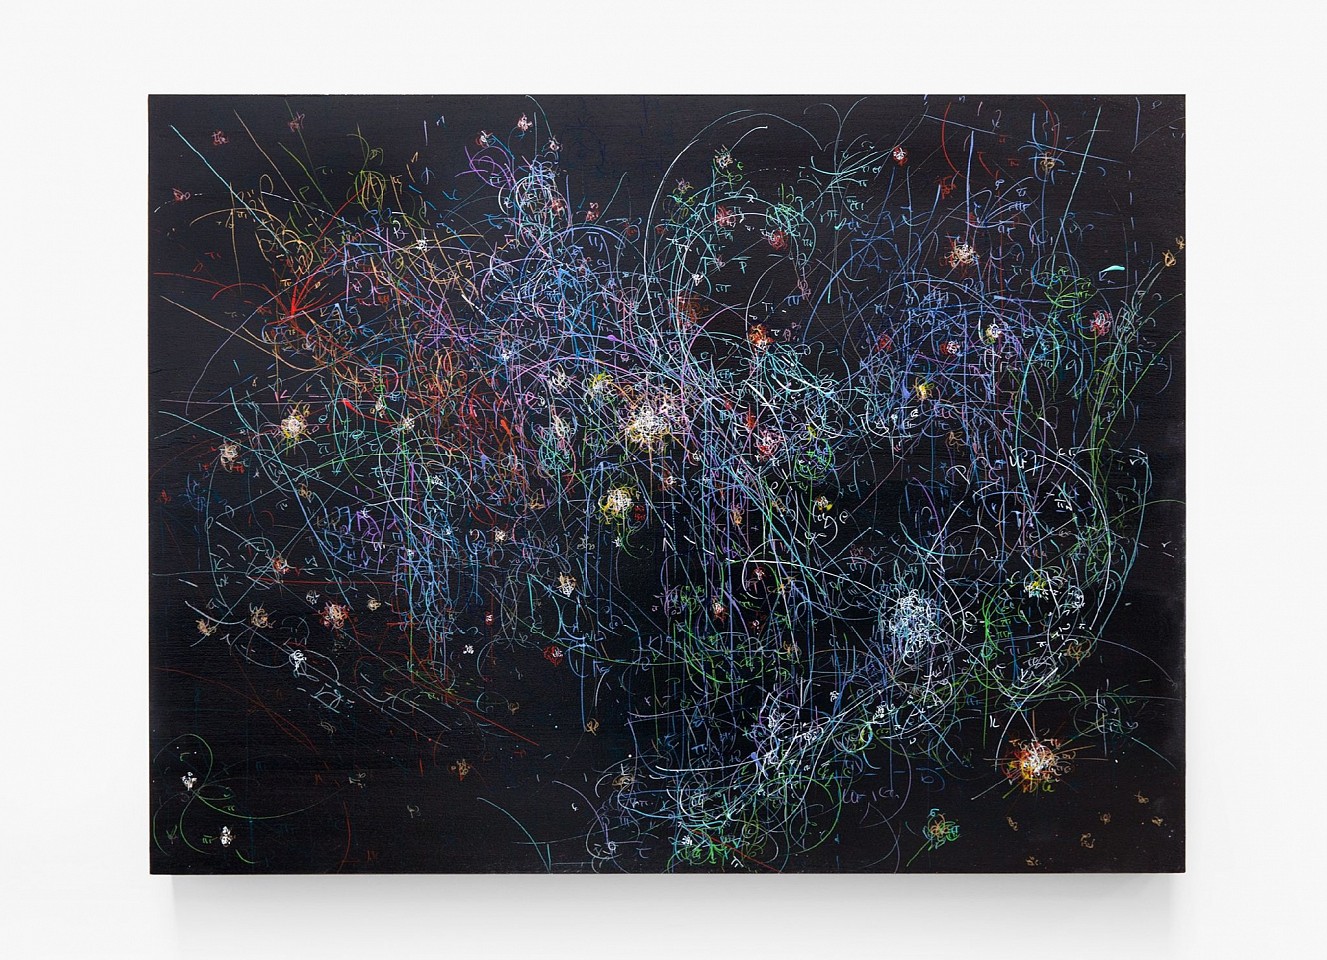 Kysa Johnson, Blow Up 284 - the long goodbye - subatomic decay patterns with the Orion Nebula, 2015
ink and high gloss on board, 24 x 30 in.
JOHK00001